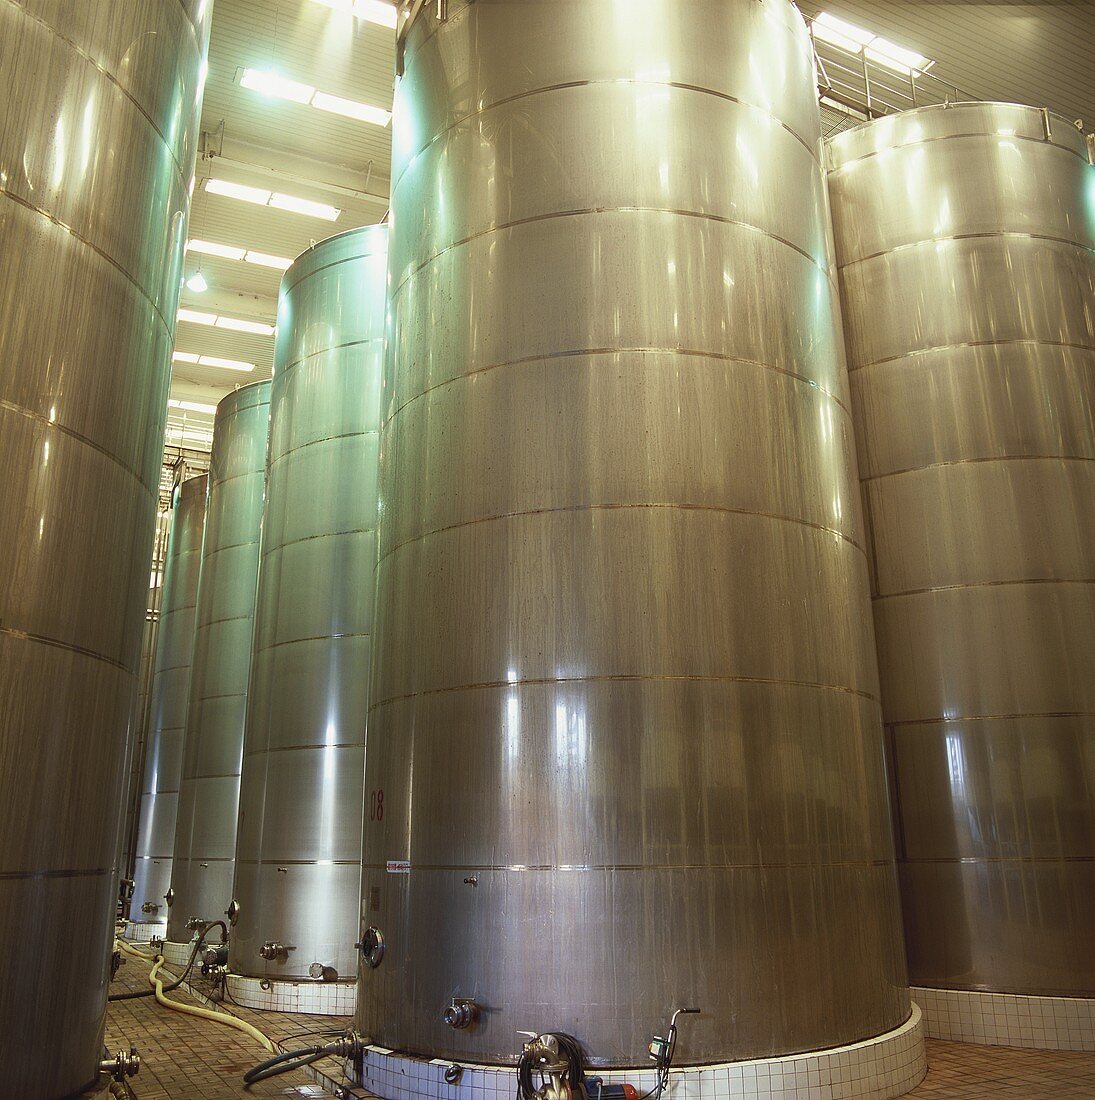 Stainless steel tanks of Great Wall Winery, Shacheng, China